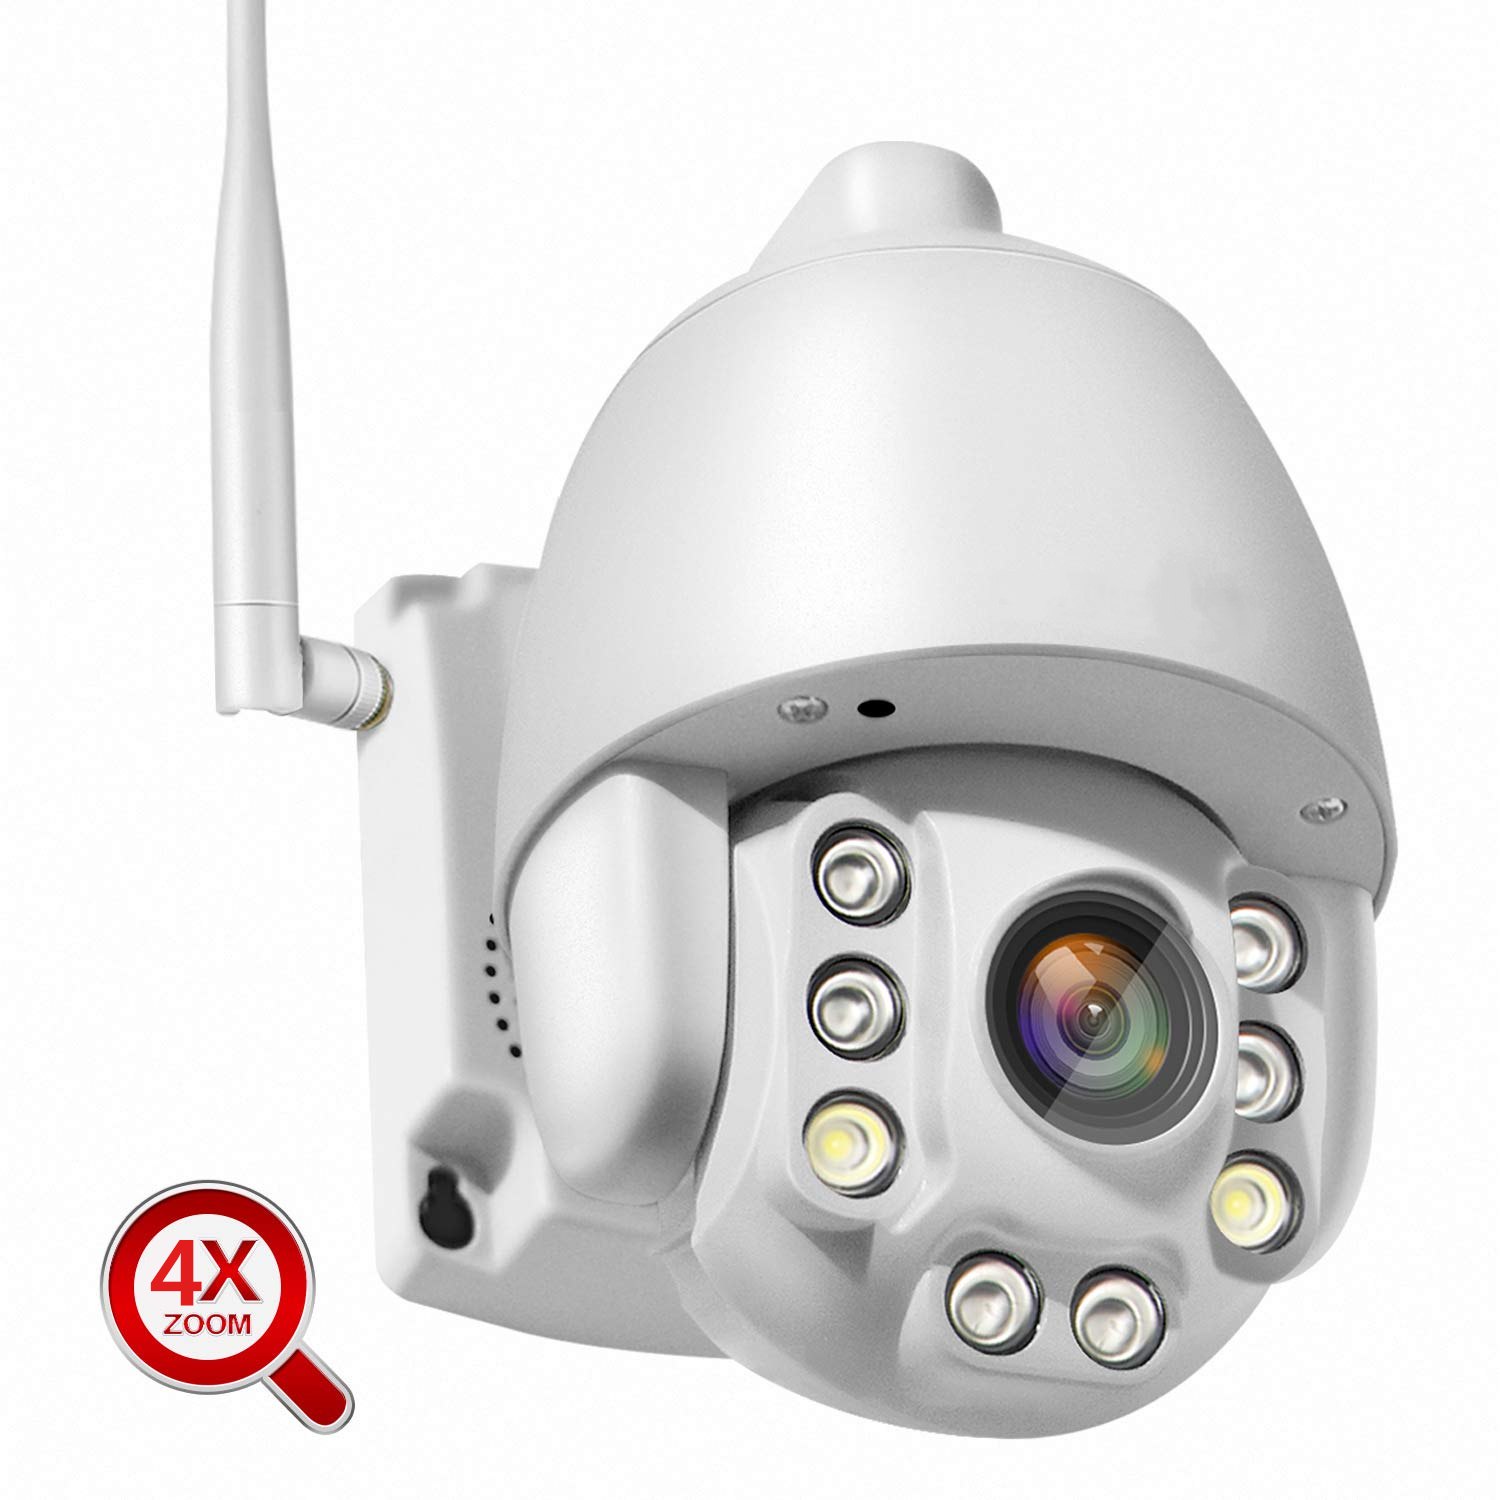 4CH H.265  5MP 6 IN 1 DVR FACE DETECTION AND PLAY BACK DVR SUPPORT XVI AHD TVI CVI CVBS IP CAMERA(ONVIF) Support 1 SATA HDD